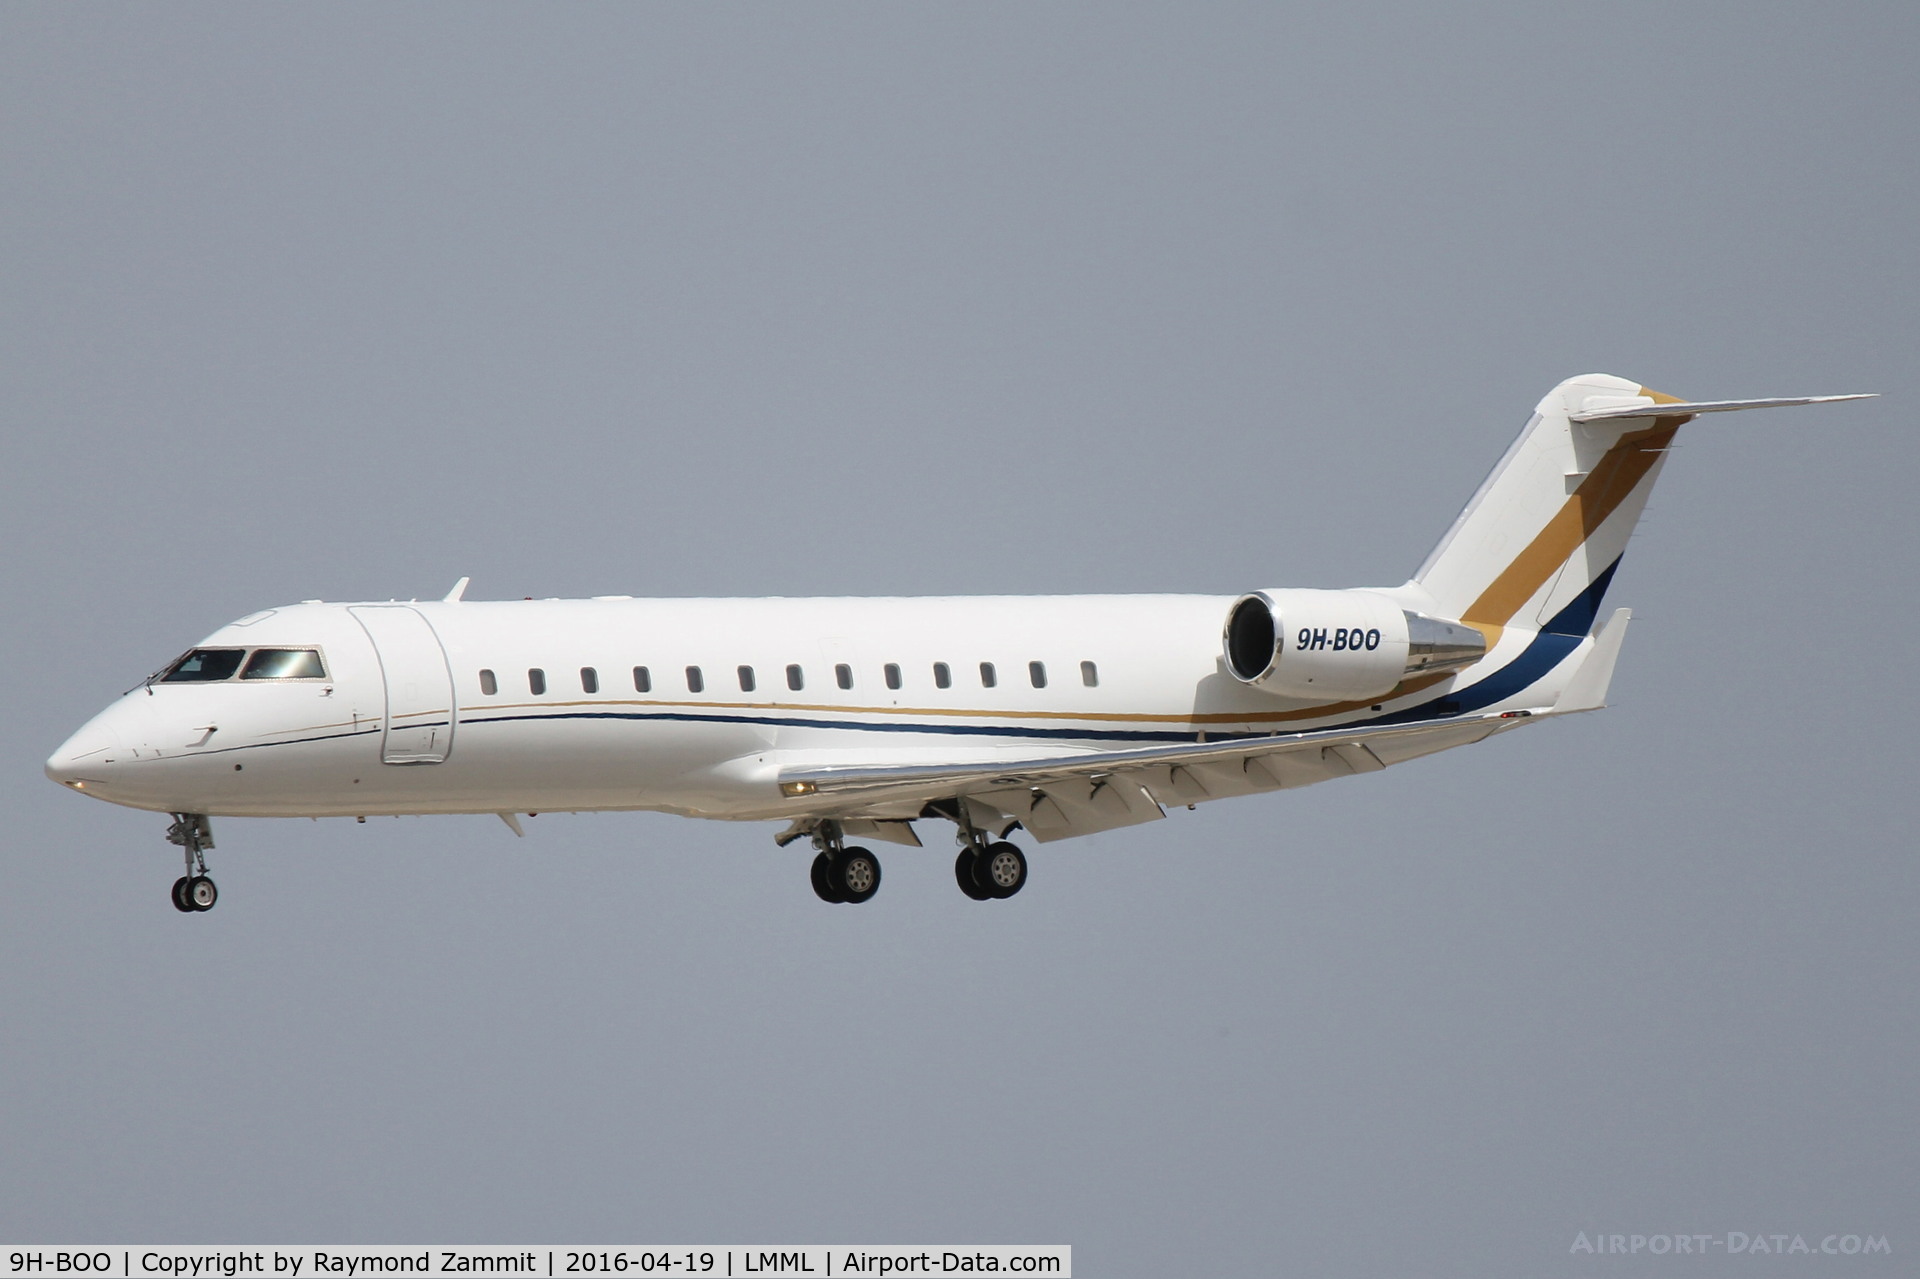 9H-BOO, 2005 Bombardier Challenger 850 (CL-600-2B19) C/N 8051, Bombardier Challenger 9H-BOO AirX